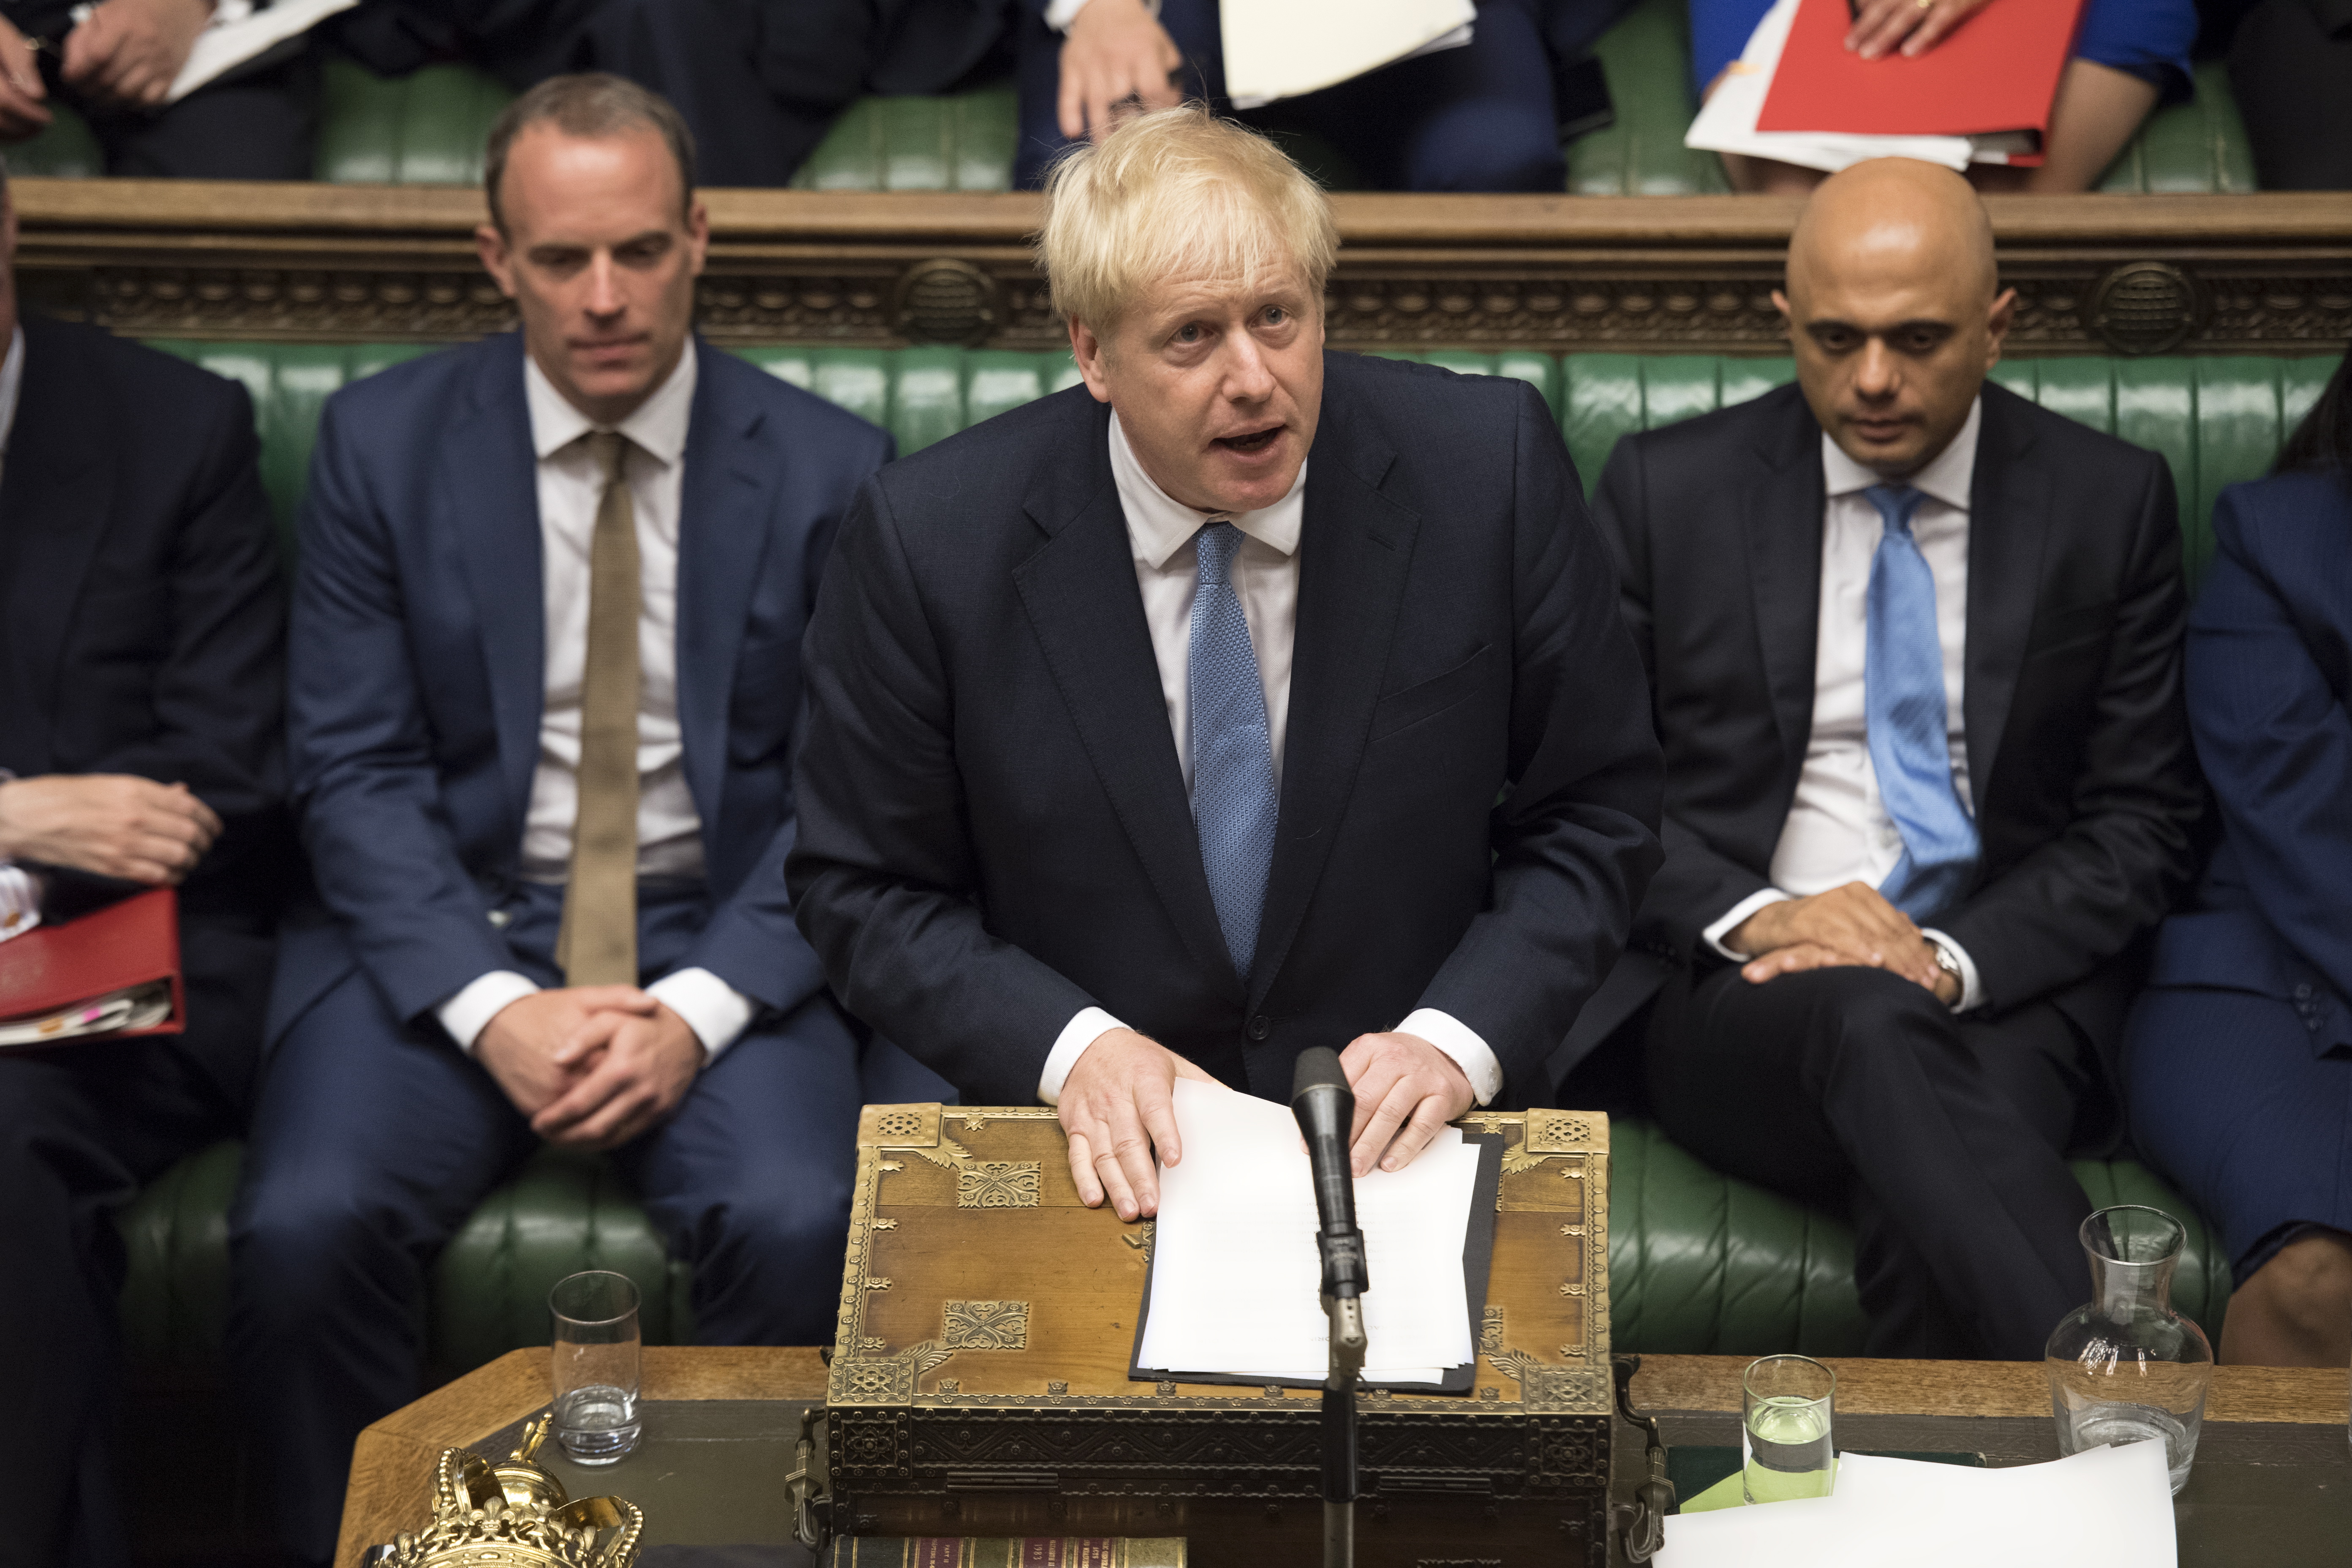 epa07740070 A handout photo made available by the UK Parliament shows British Prime Minister Boris Johnson making his first address to Parliament as Prime Minister at the House of Commons in central London, Britain, 25 July 2019.  EPA/JESSICA TAYLOR / UK PARLIAMENT / HANDOUT MANDATORY CREDIT: UK PARLIAMENT / JESSICA TAYLOR HANDOUT EDITORIAL USE ONLY/NO SALES